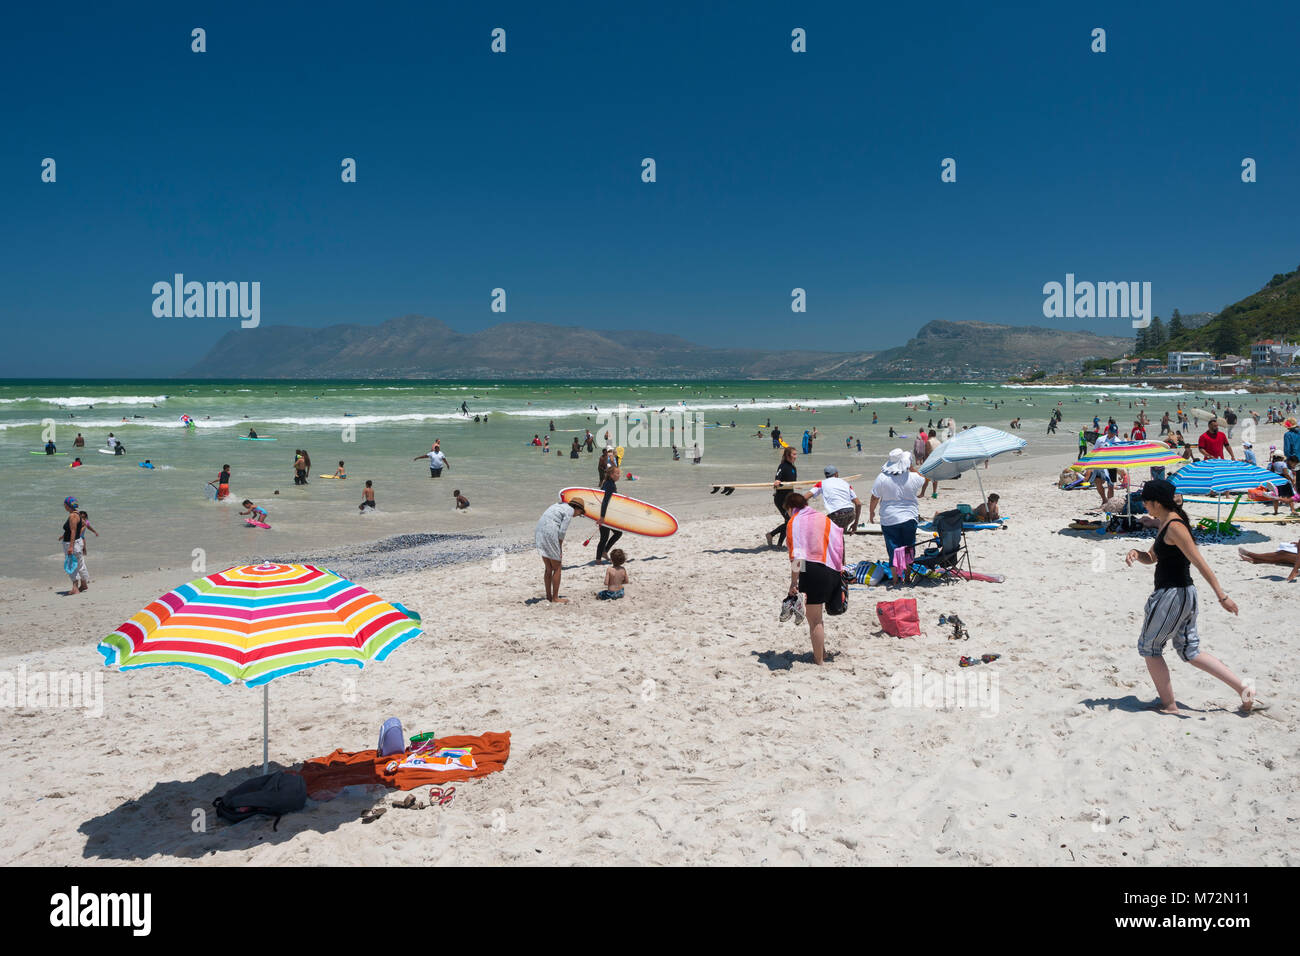 Crowds of people on Muizenberg beach in Cape Town, South Africa. Stock Photo